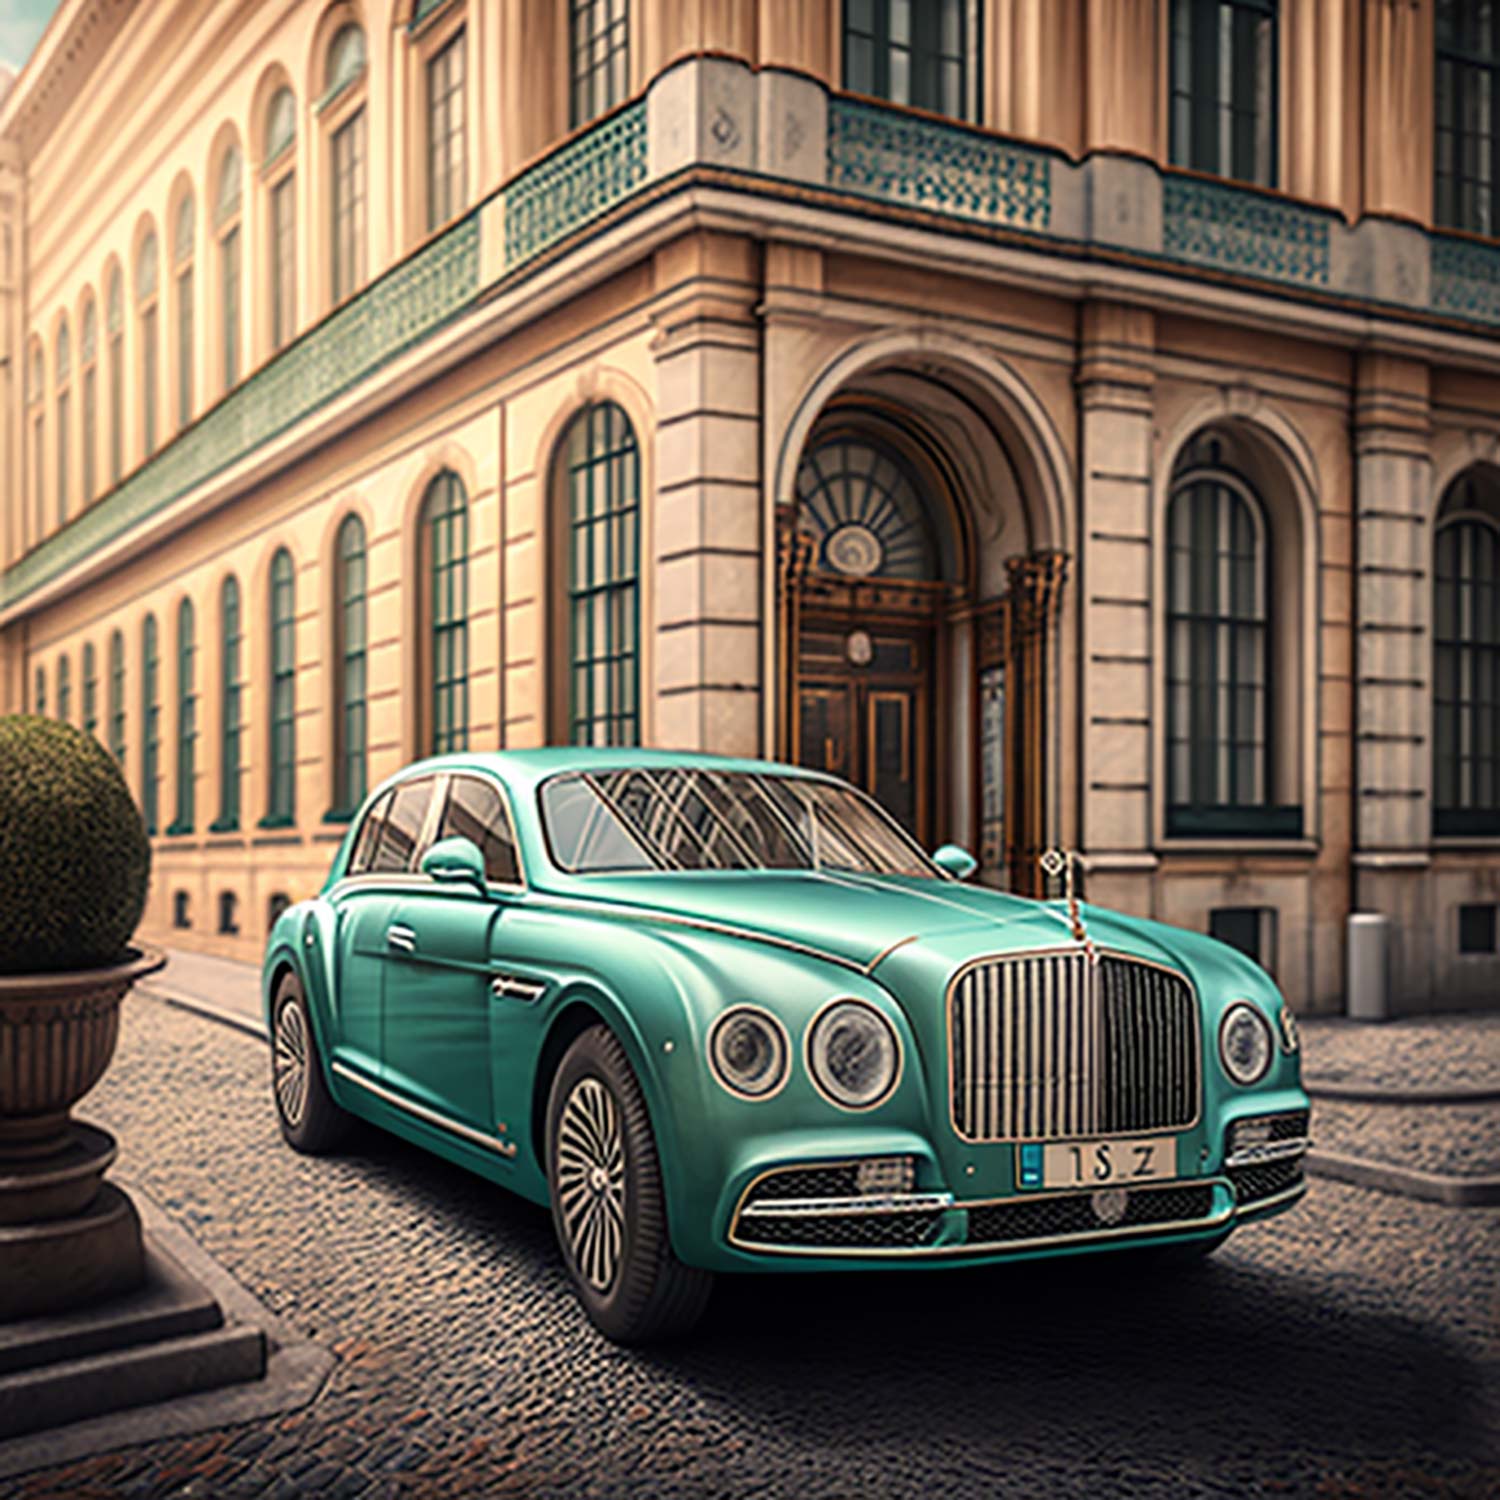 This image shows an illustration of a Bentley in Vienna.